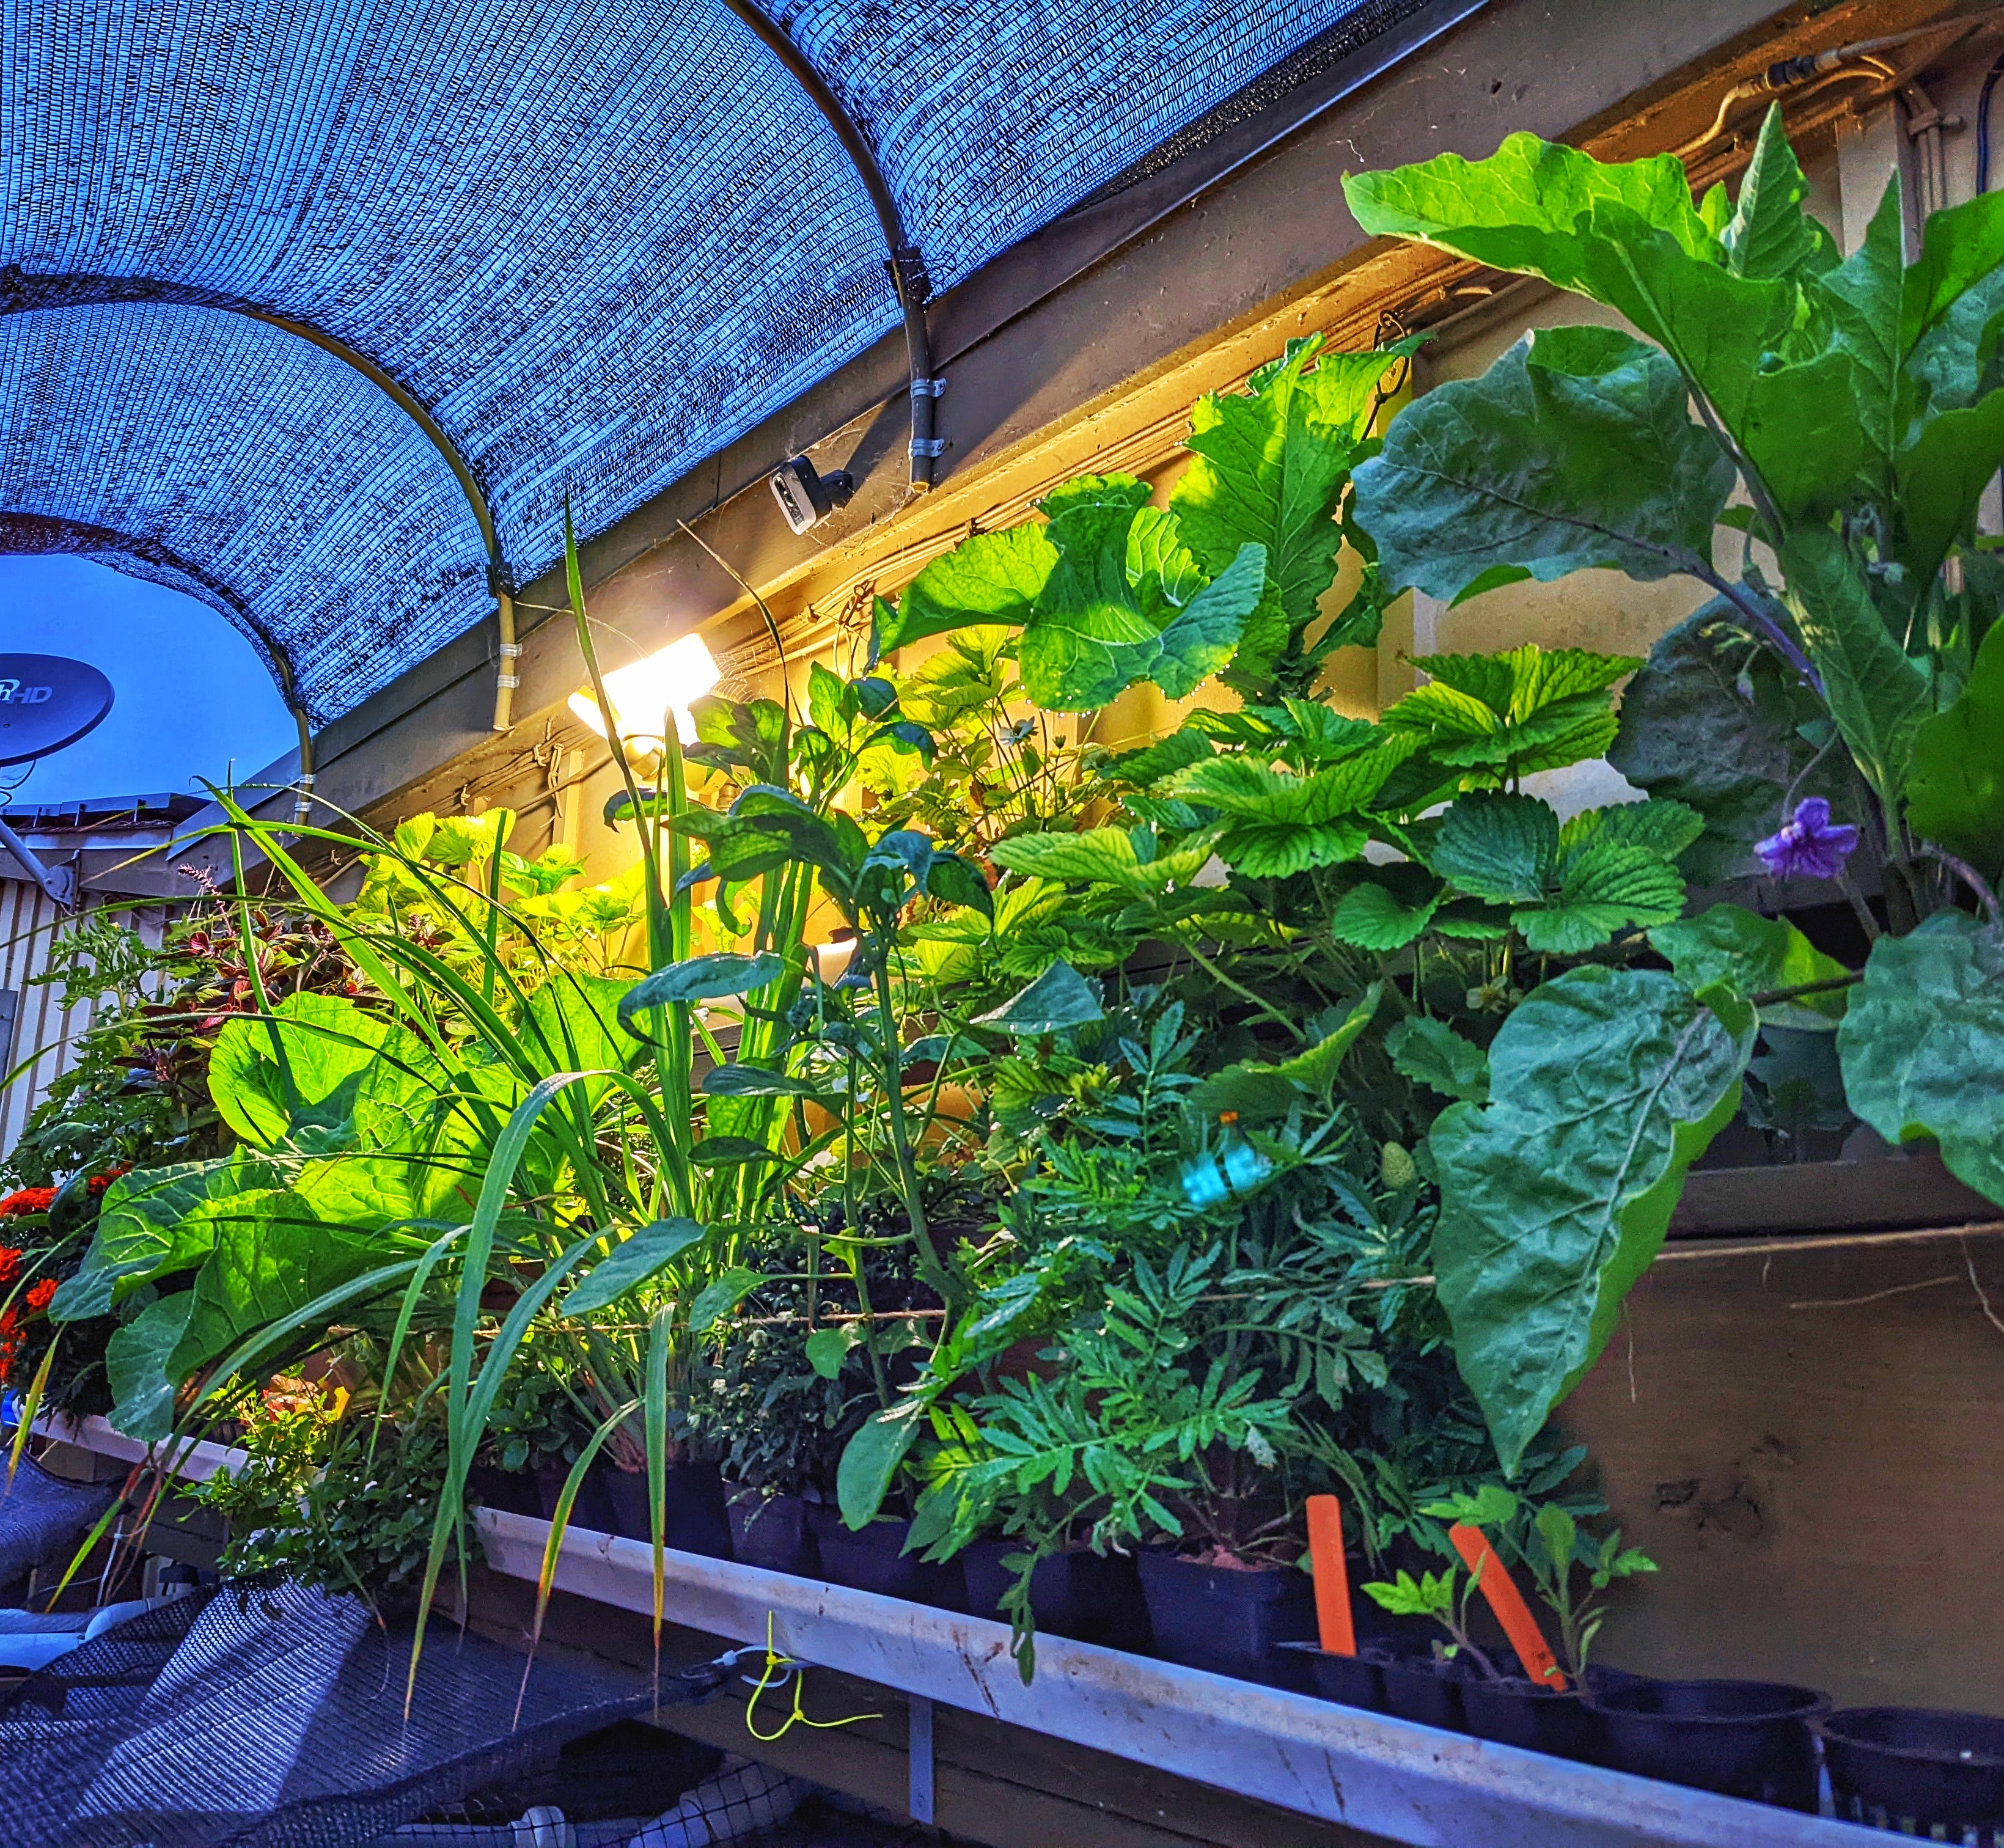 A beatiful display of various plants Aquaponics 4 Life worked hard to grow